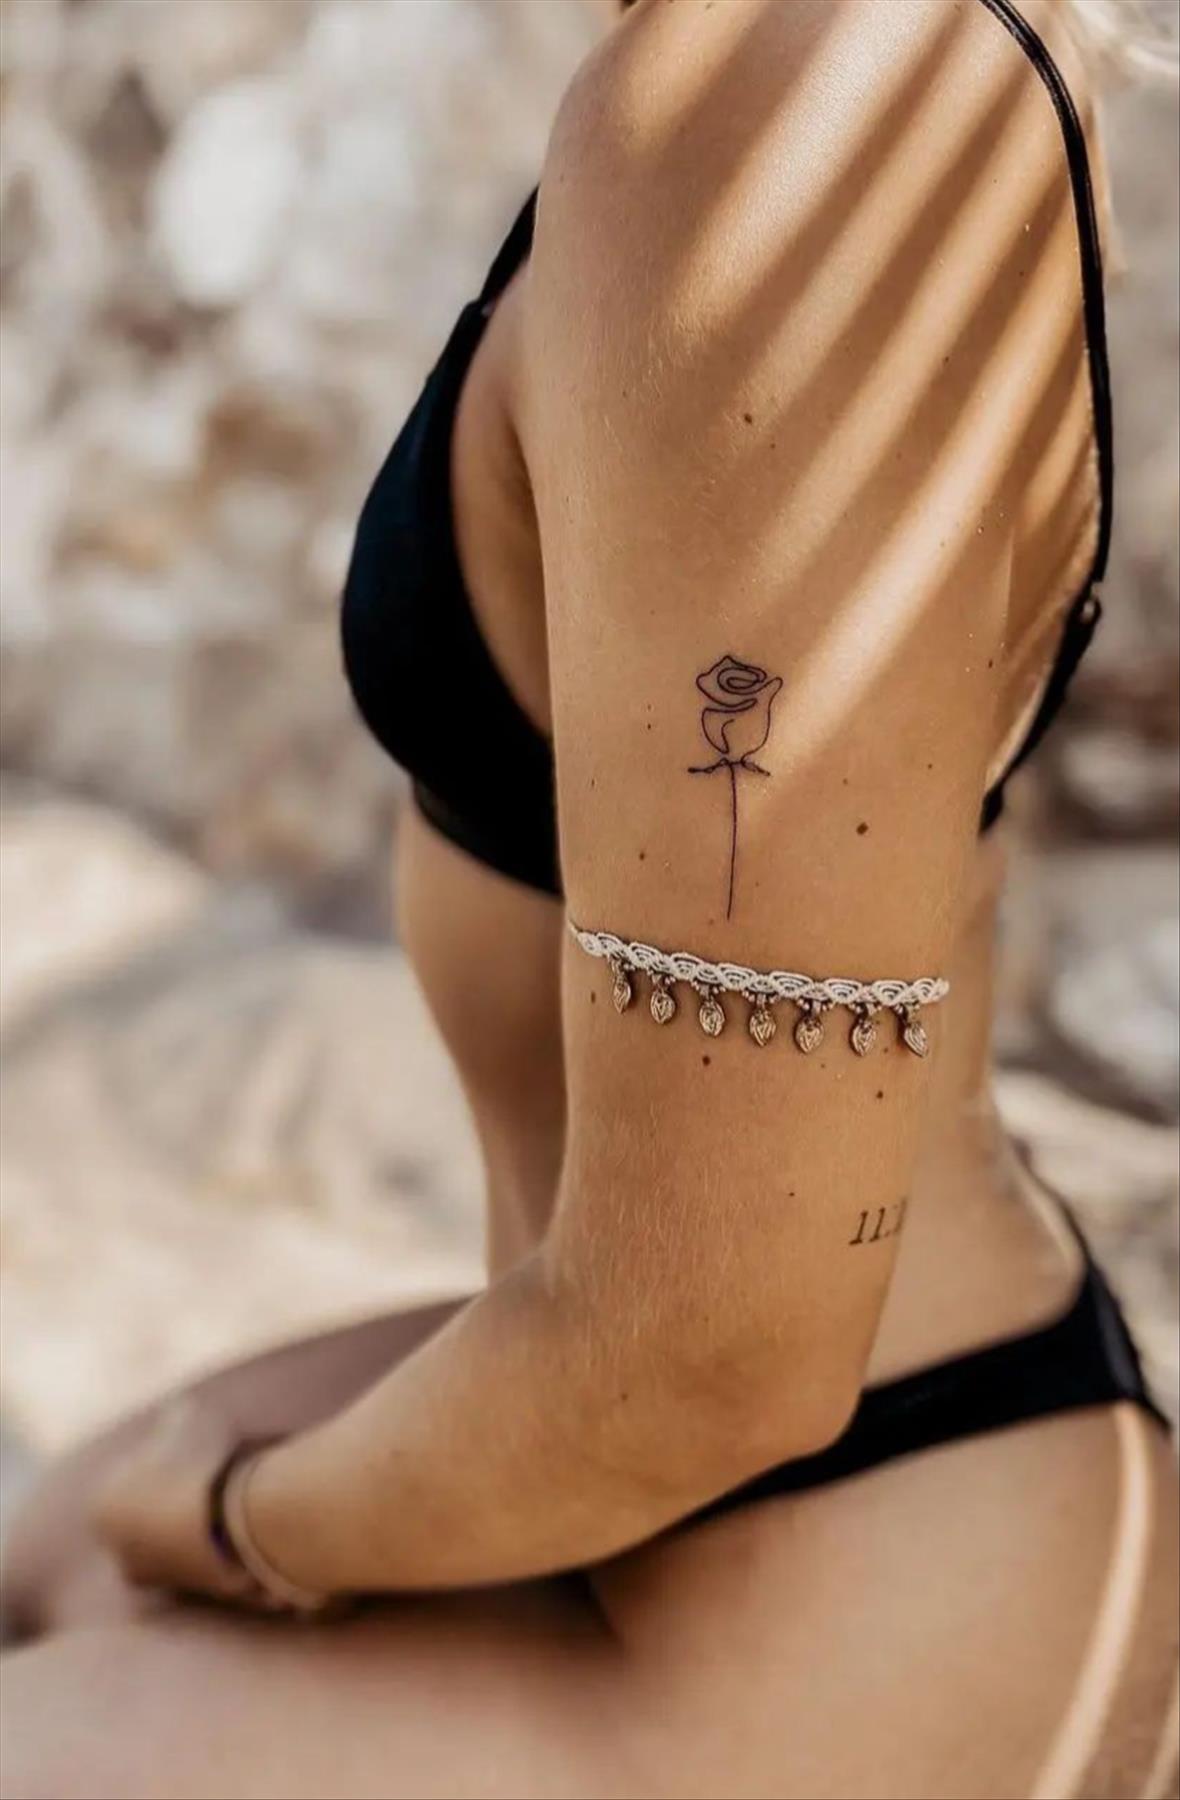 Cool tattoo design and tattoo placement for girls